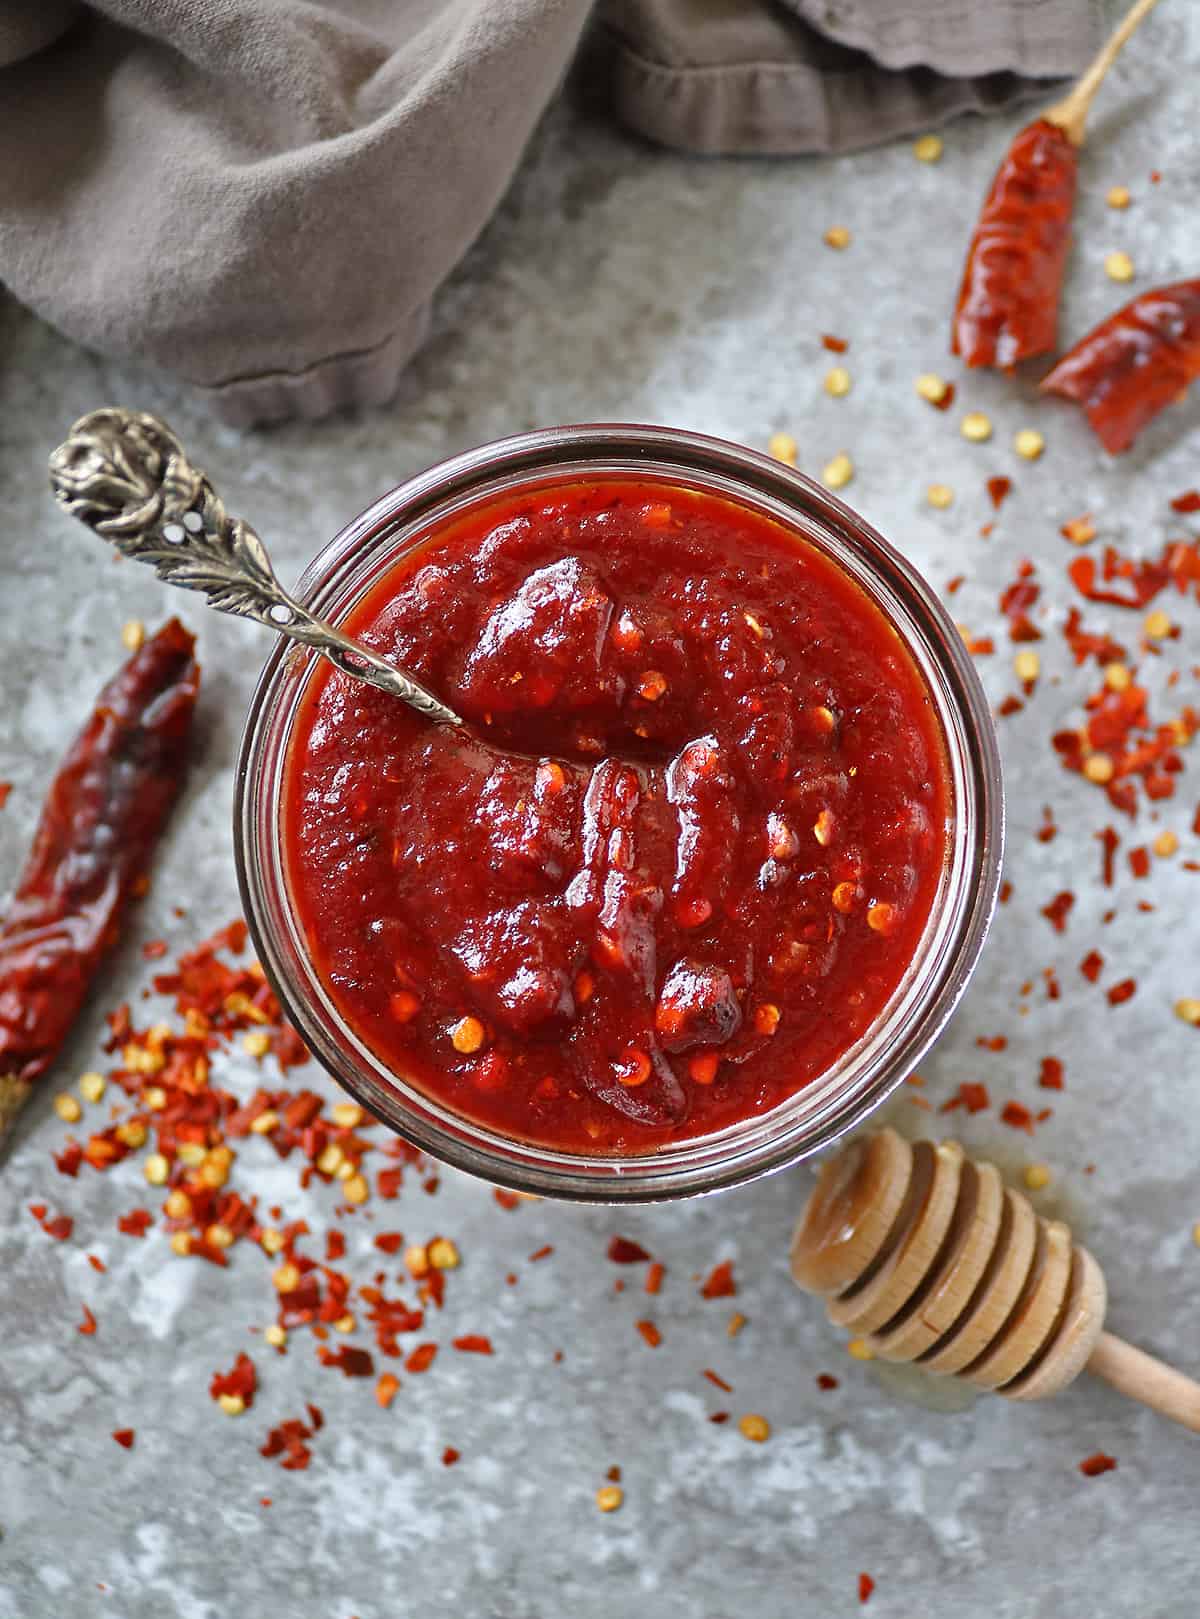 Delicious, thick, sweet chili sauce.